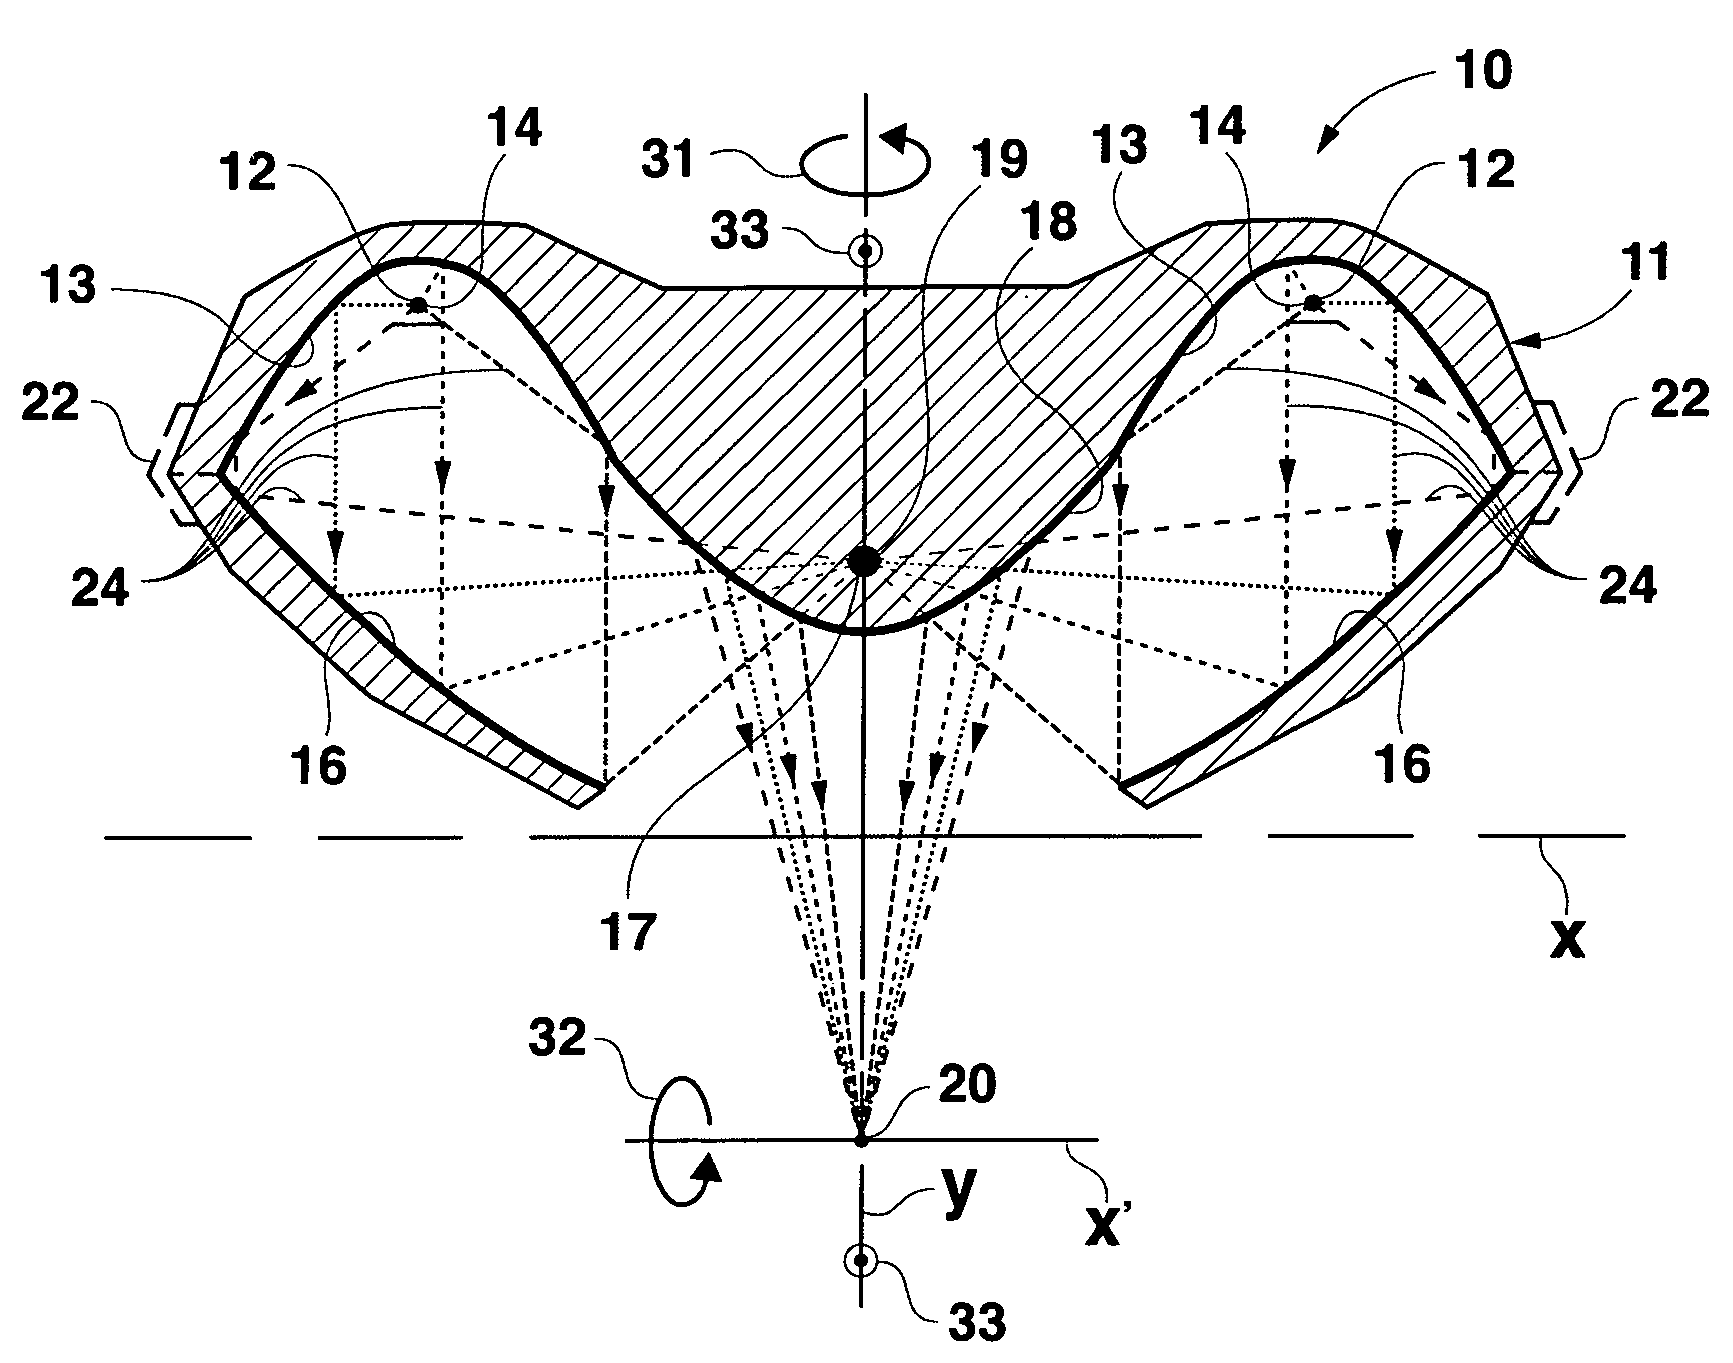 Energy concentrator system and method